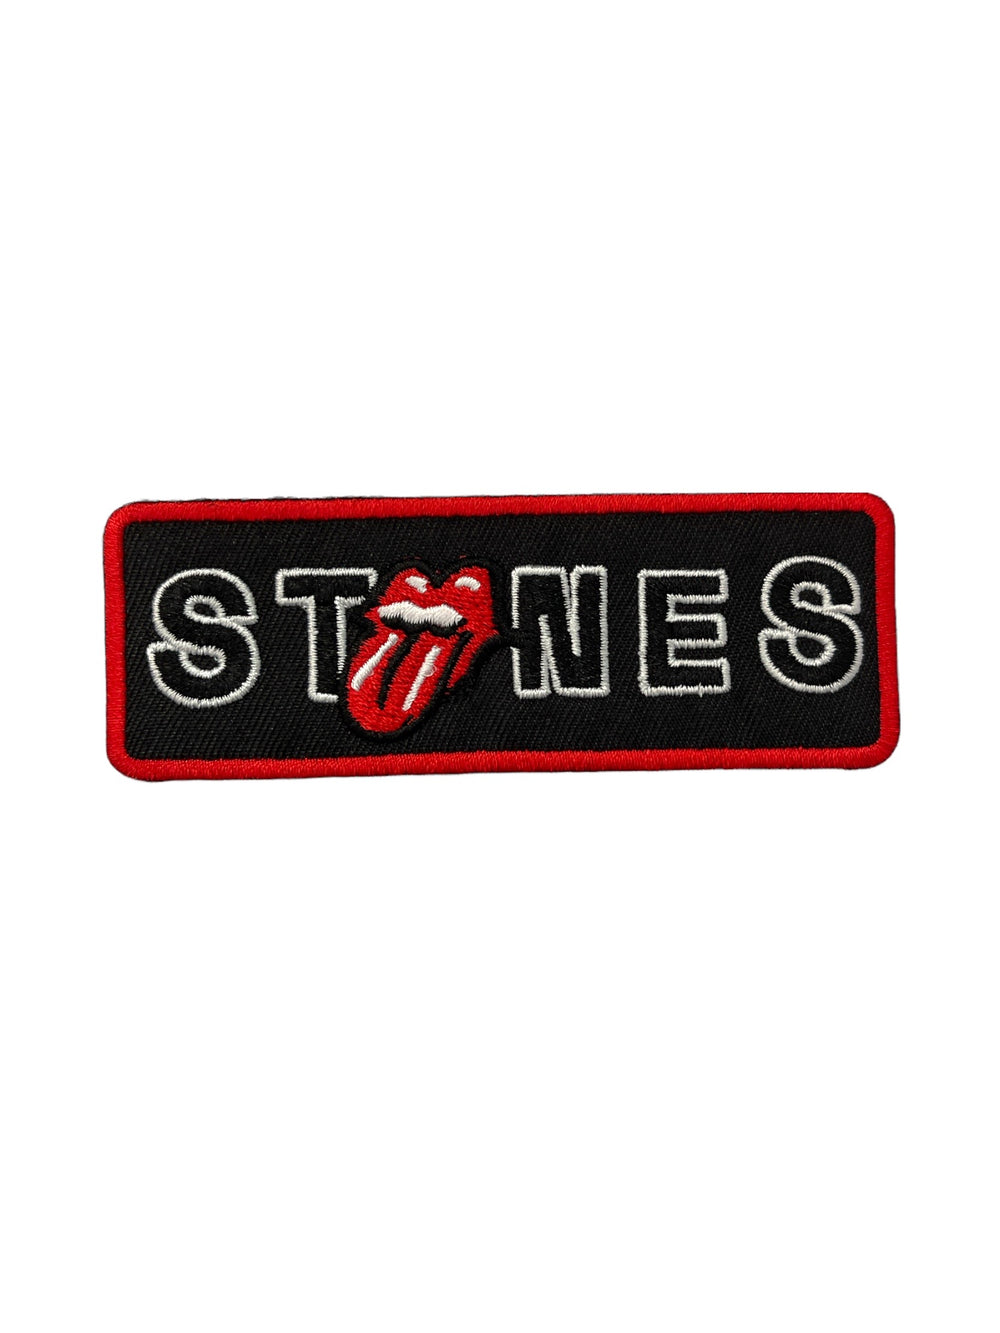 Rolling Stones The Standard Patch: Border No Filter Licks Official Woven Patch Brand New